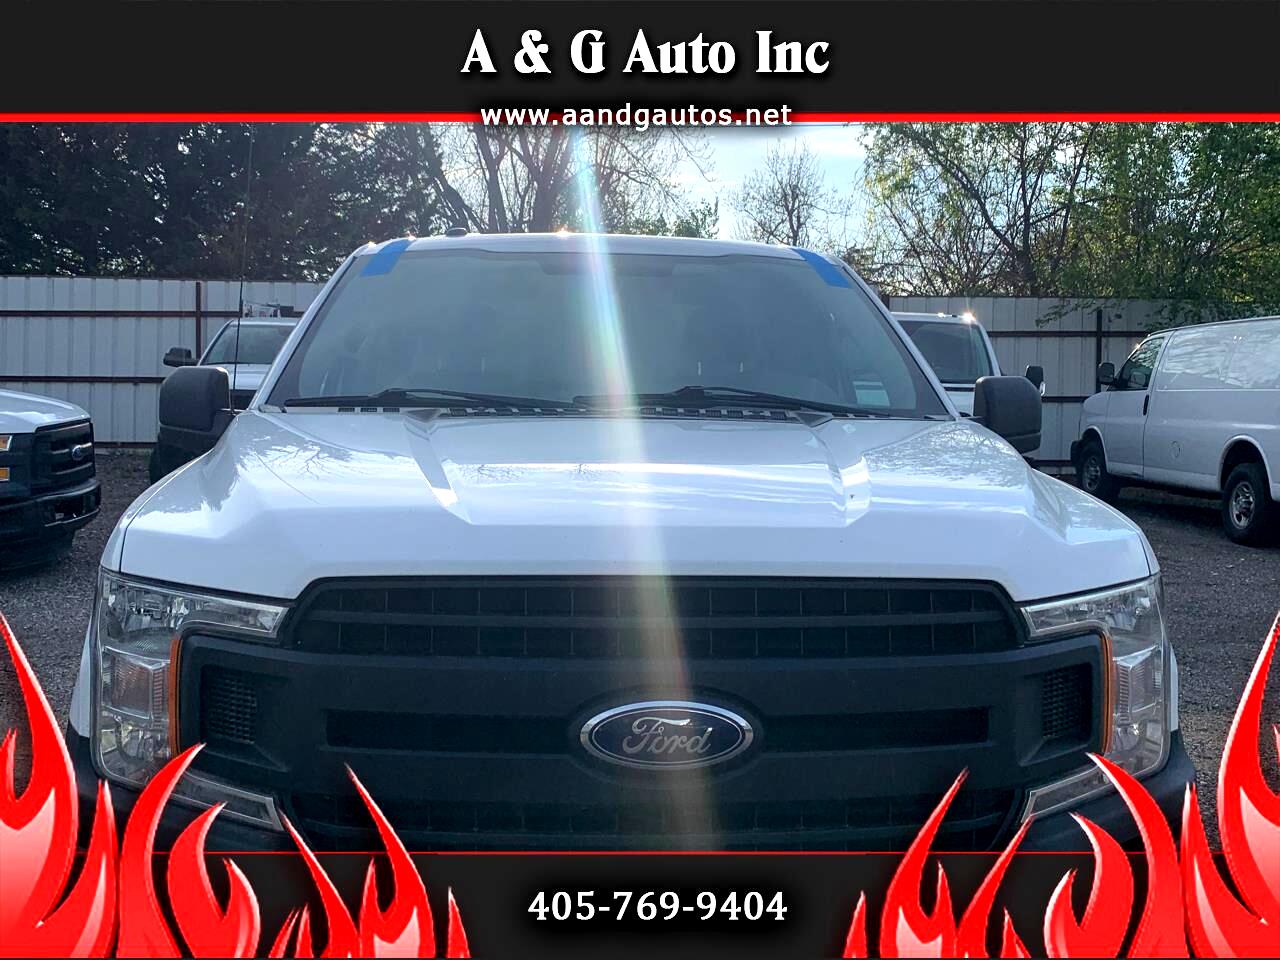 2019 Ford F-150 for sale in Oklahoma City OK 73141 by A & G Auto Inc